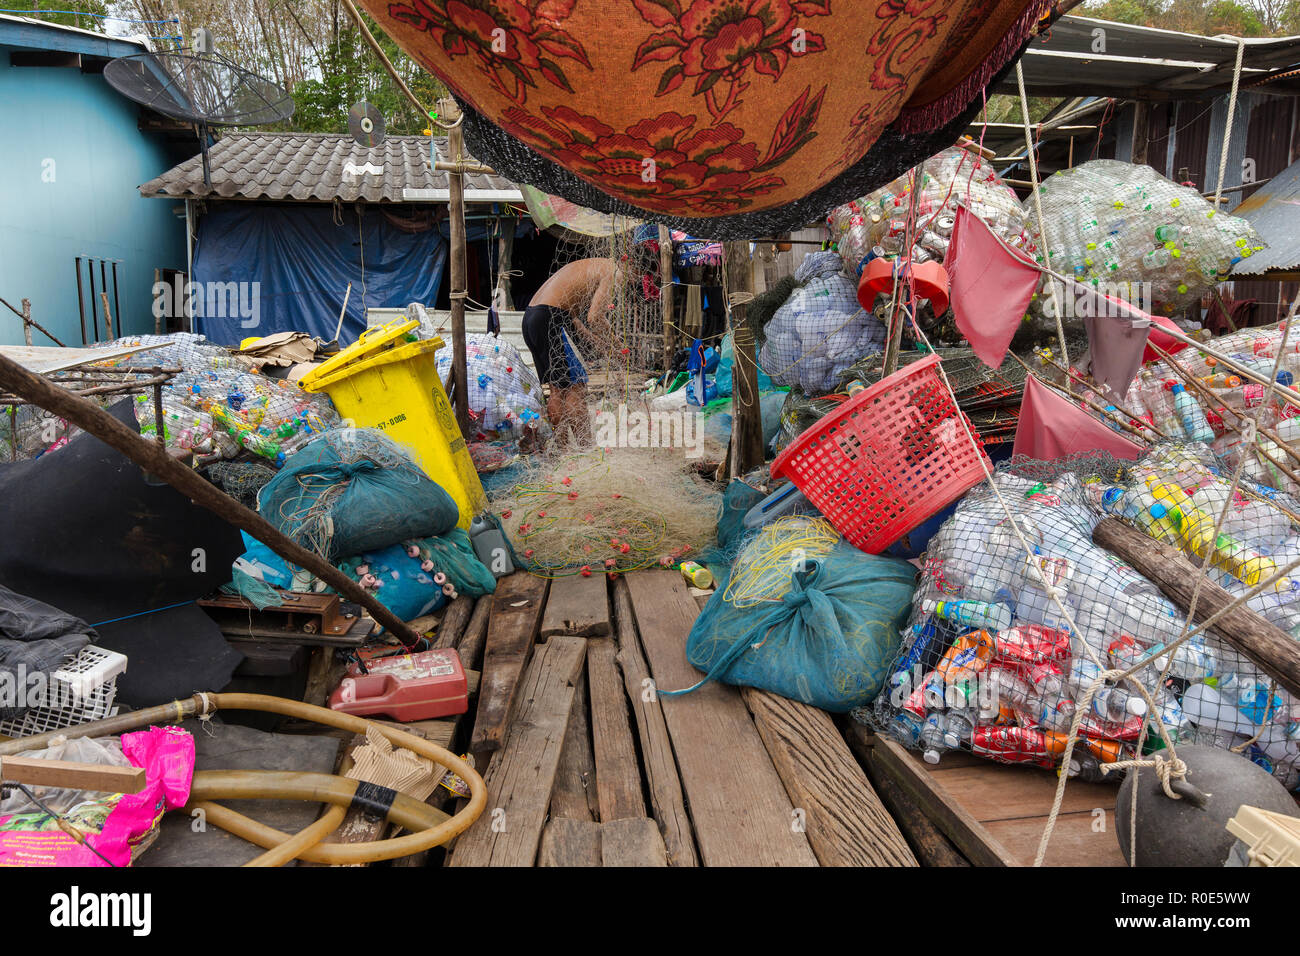 AO SALAD, THAILAND, JANUARY 31, 2016 : A man is selecting recyclable stuff at home in the AO Salad fishing village in Ko Kood Island, Thailand Stock Photo